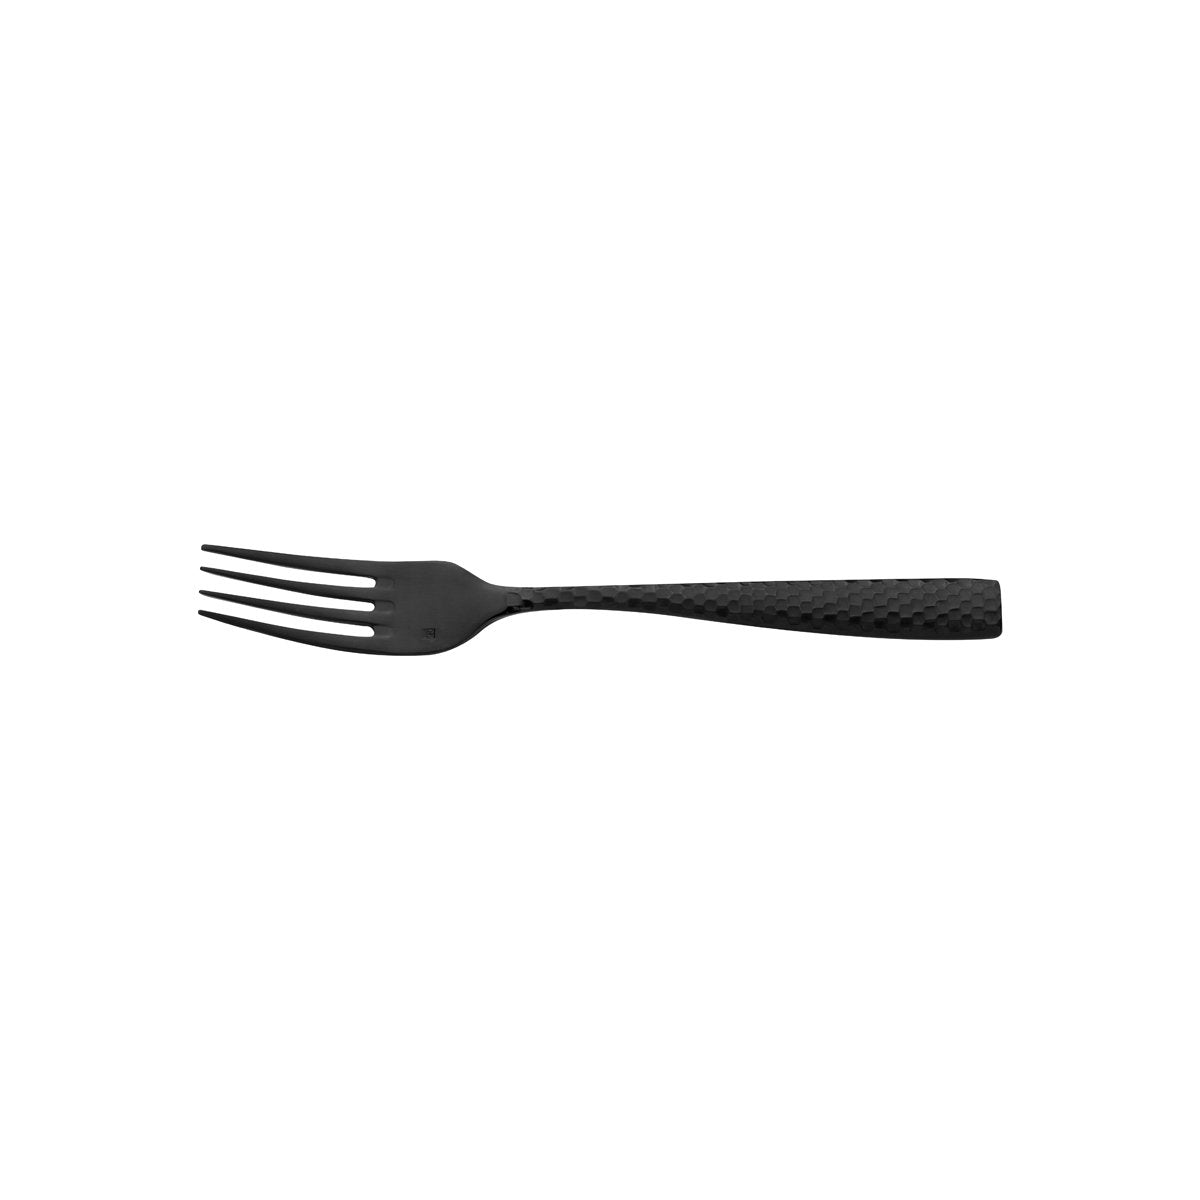 Table Fork - Lucca Faceted, Black from Fortessa. made out of Stainless Steel and sold in boxes of 12. Hospitality quality at wholesale price with The Flying Fork! 